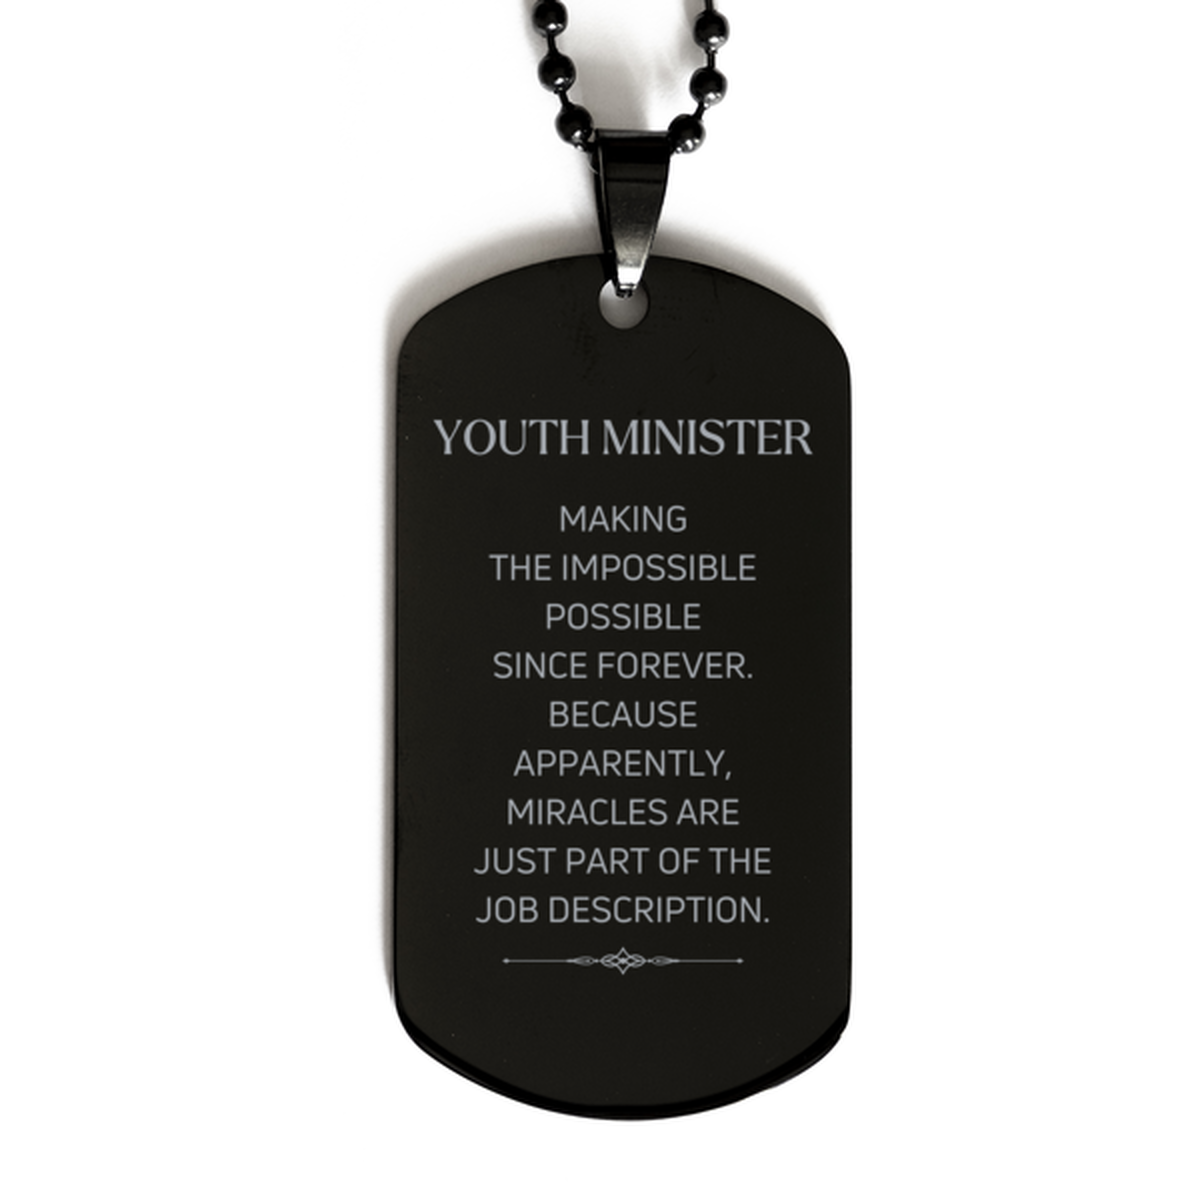 Funny Youth Minister Gifts, Miracles are just part of the job description, Inspirational Birthday Black Dog Tag For Youth Minister, Men, Women, Coworkers, Friends, Boss